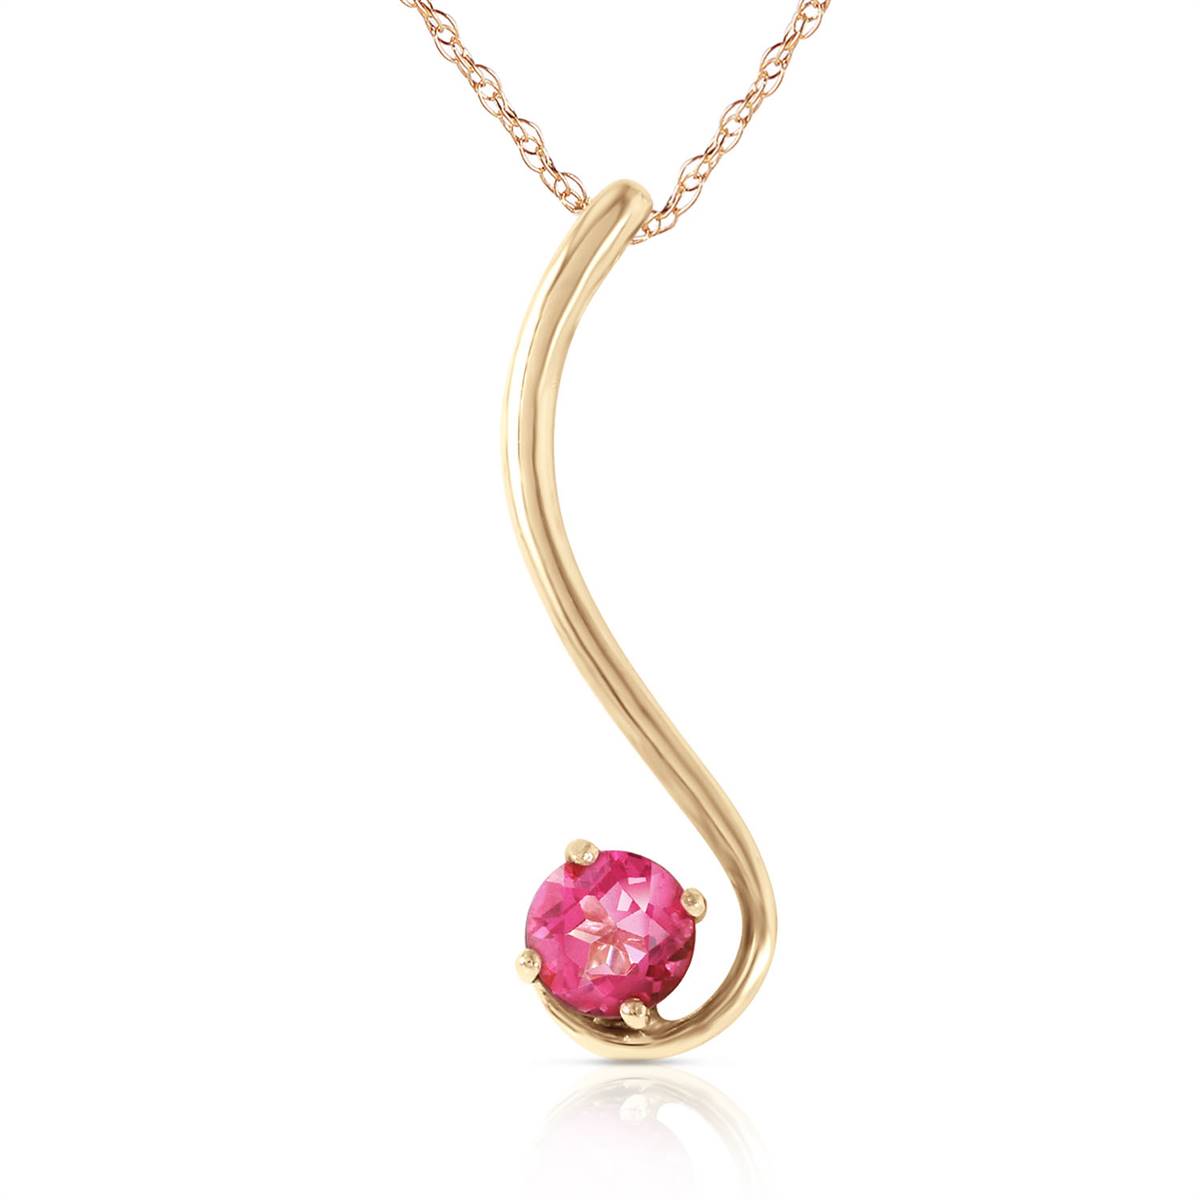 0.55 Carat 14K Solid Yellow Gold Pink Anemones Pink Topaz Necklace